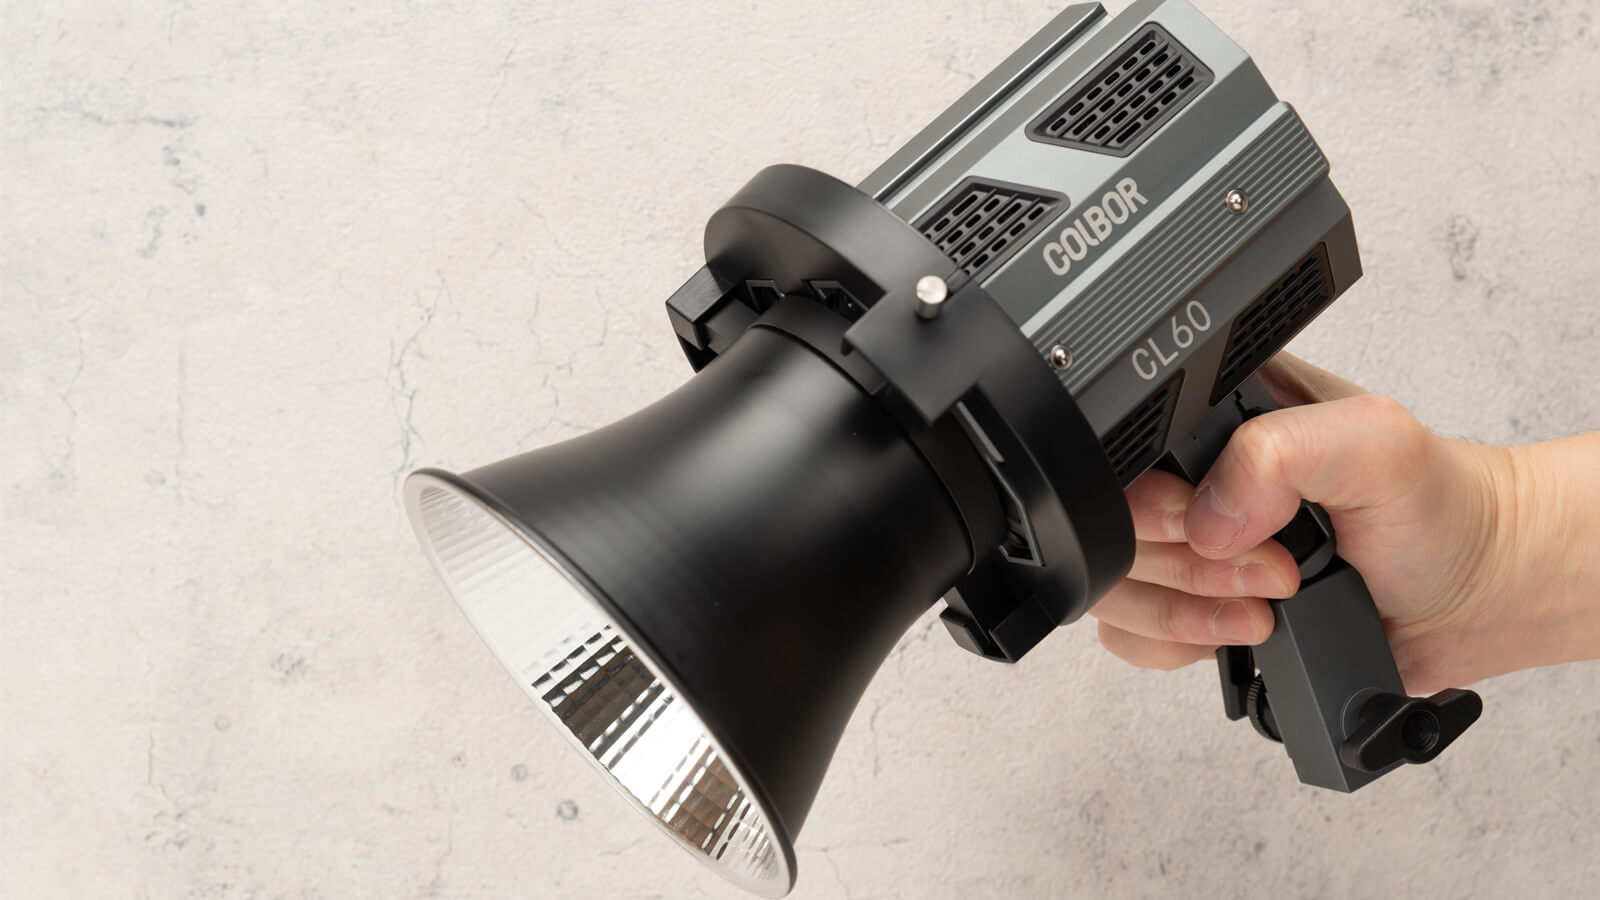 COLBOR CL60 is a portable light for YouTube studio that can be handheld.